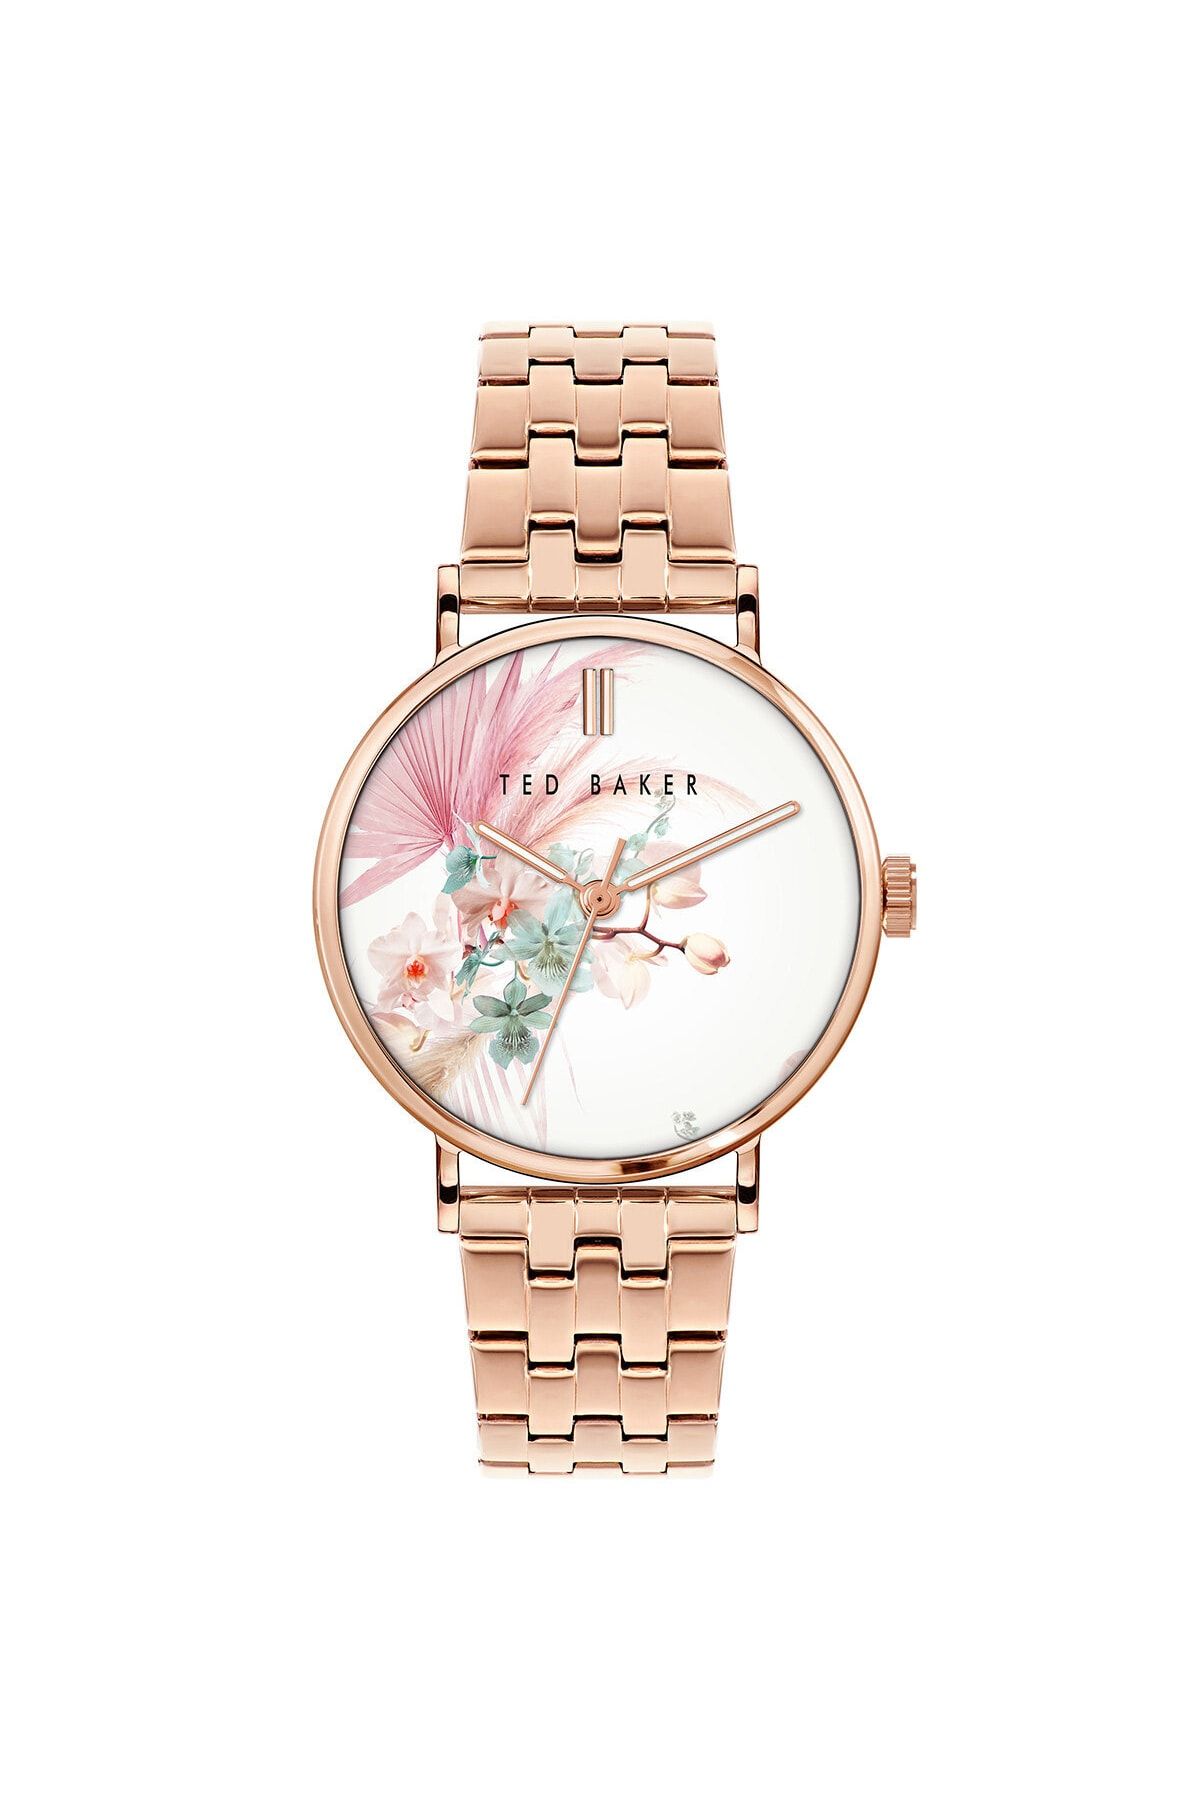 Ted Baker London Phylipa Peonia 3-Hand Mesh Bracelet Watch | Dillard's |  Accessories watches women, Rose gold, Gold plated bracelets